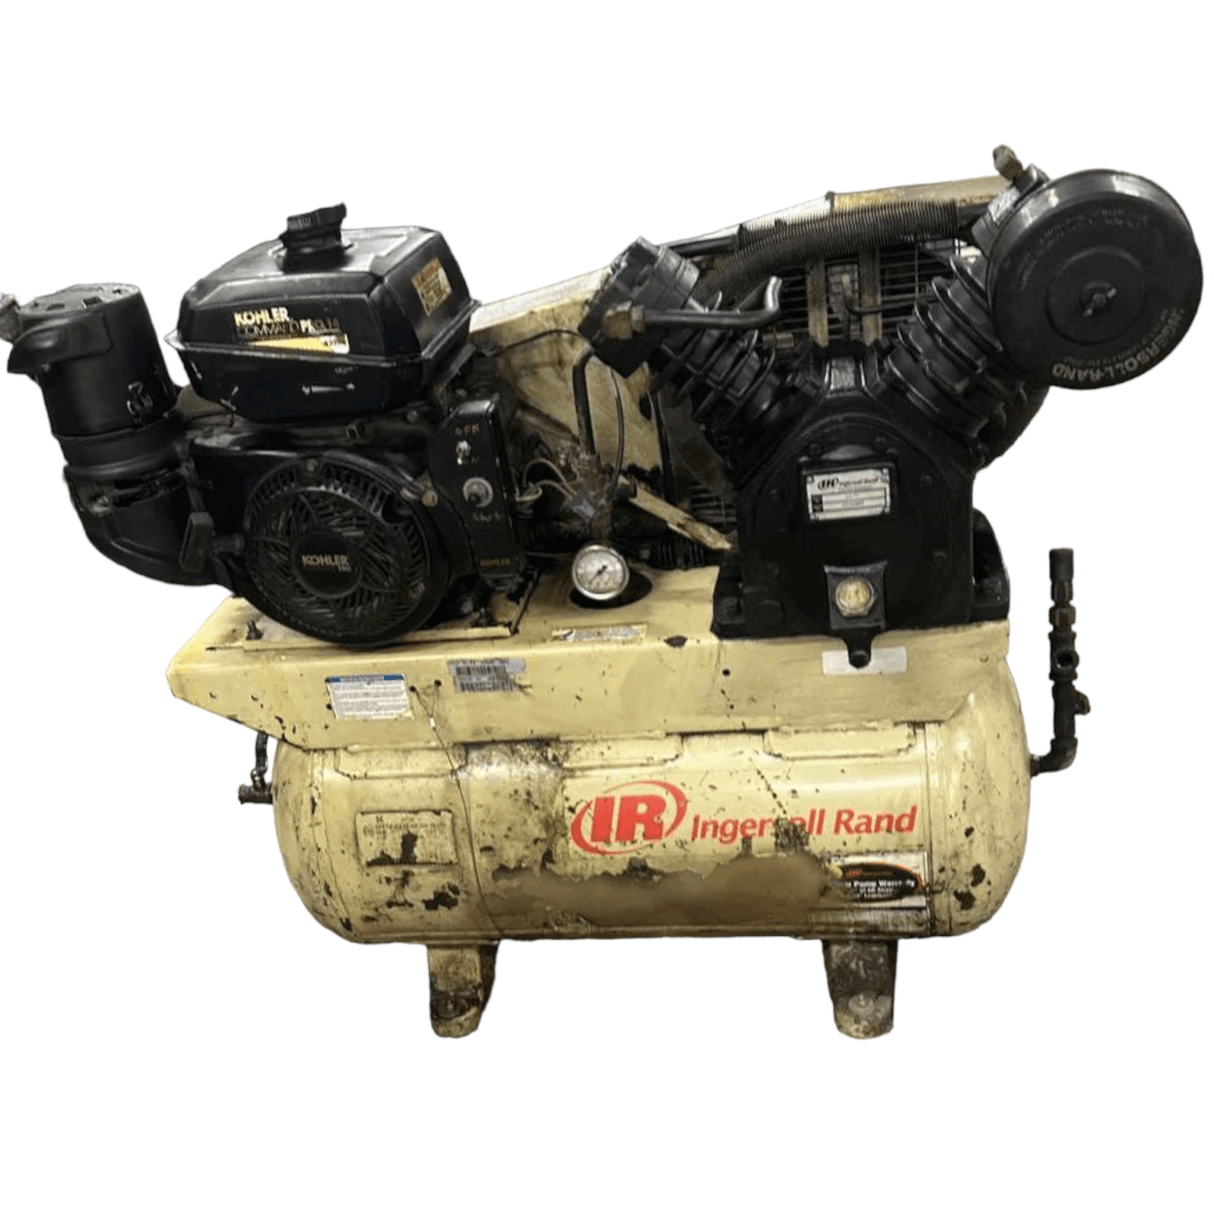 2475F14G Ingersoll Rand Kohler Engine 14Hp Gas Drive Air Compressor Used - Truck To Trailer